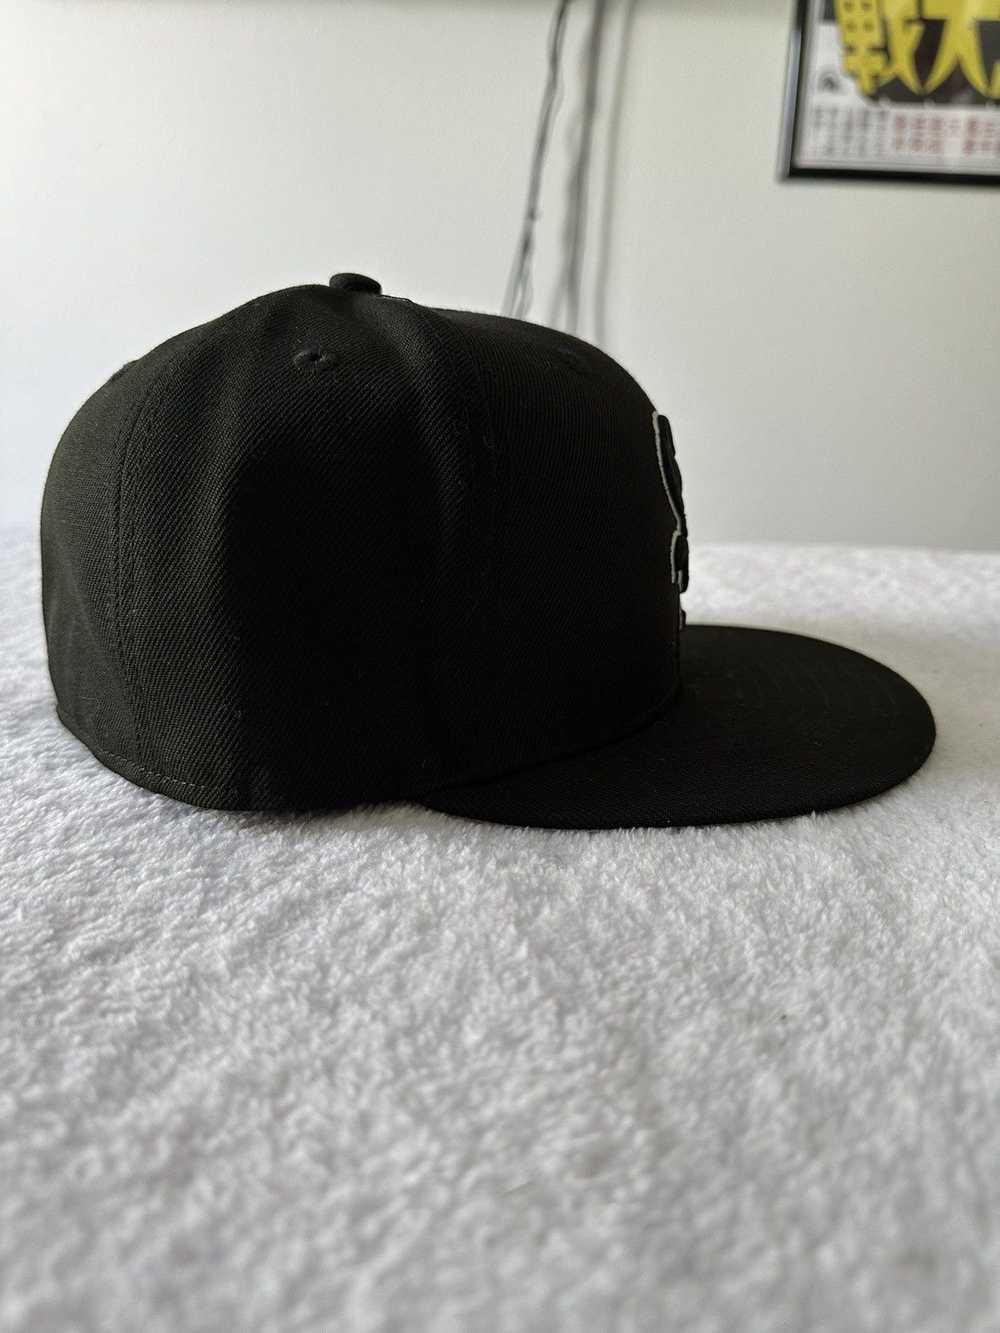 New Era Chicago White Sox Fitted Hat (7 1/4) - image 2